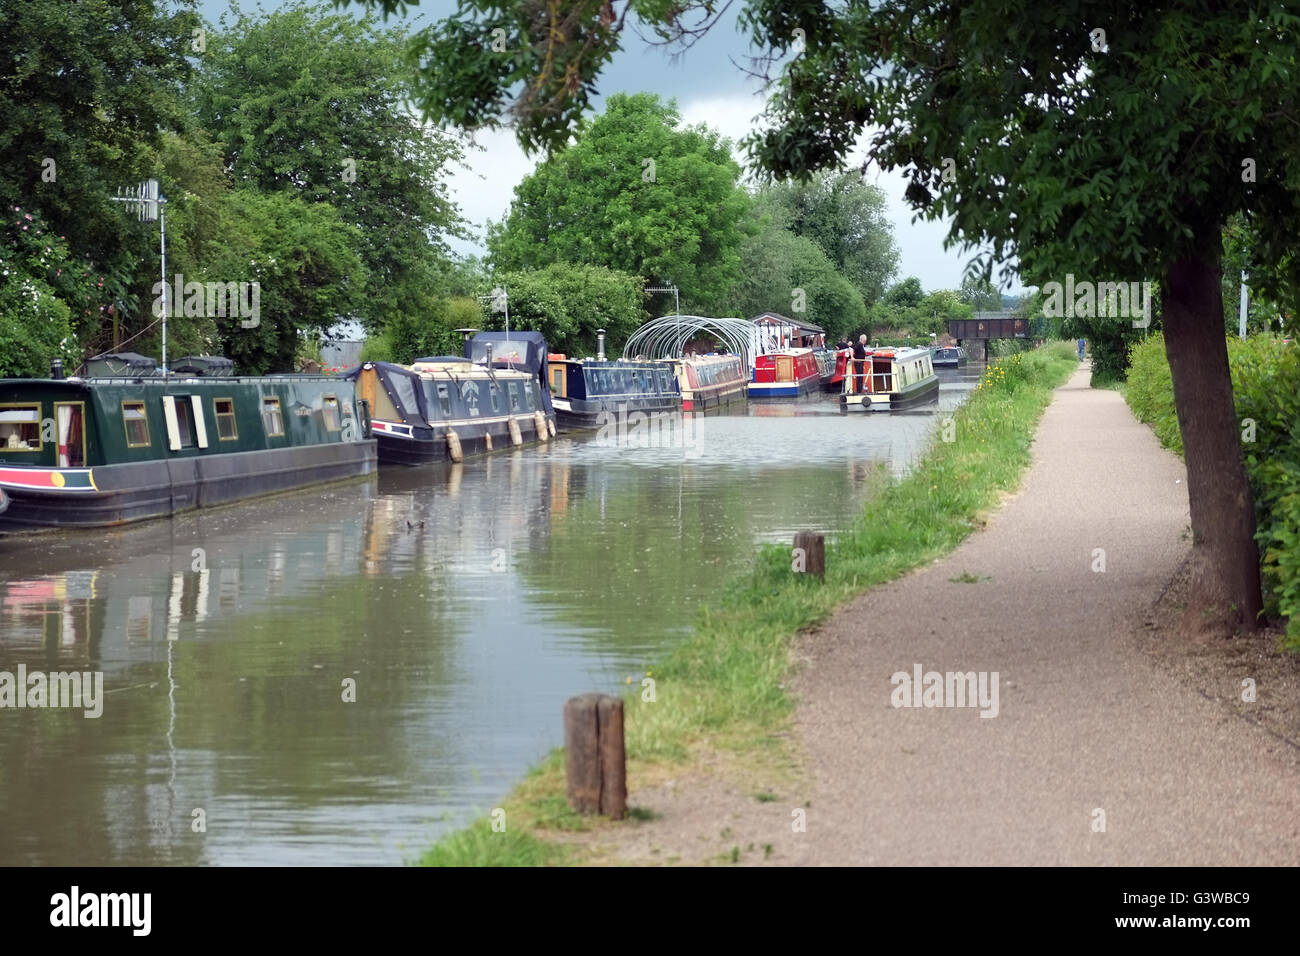 Narrow boats on the Stratford upon Avon canal, on the outskirts of the town of Stratford, Warwickshire, England, UK Stock Photo